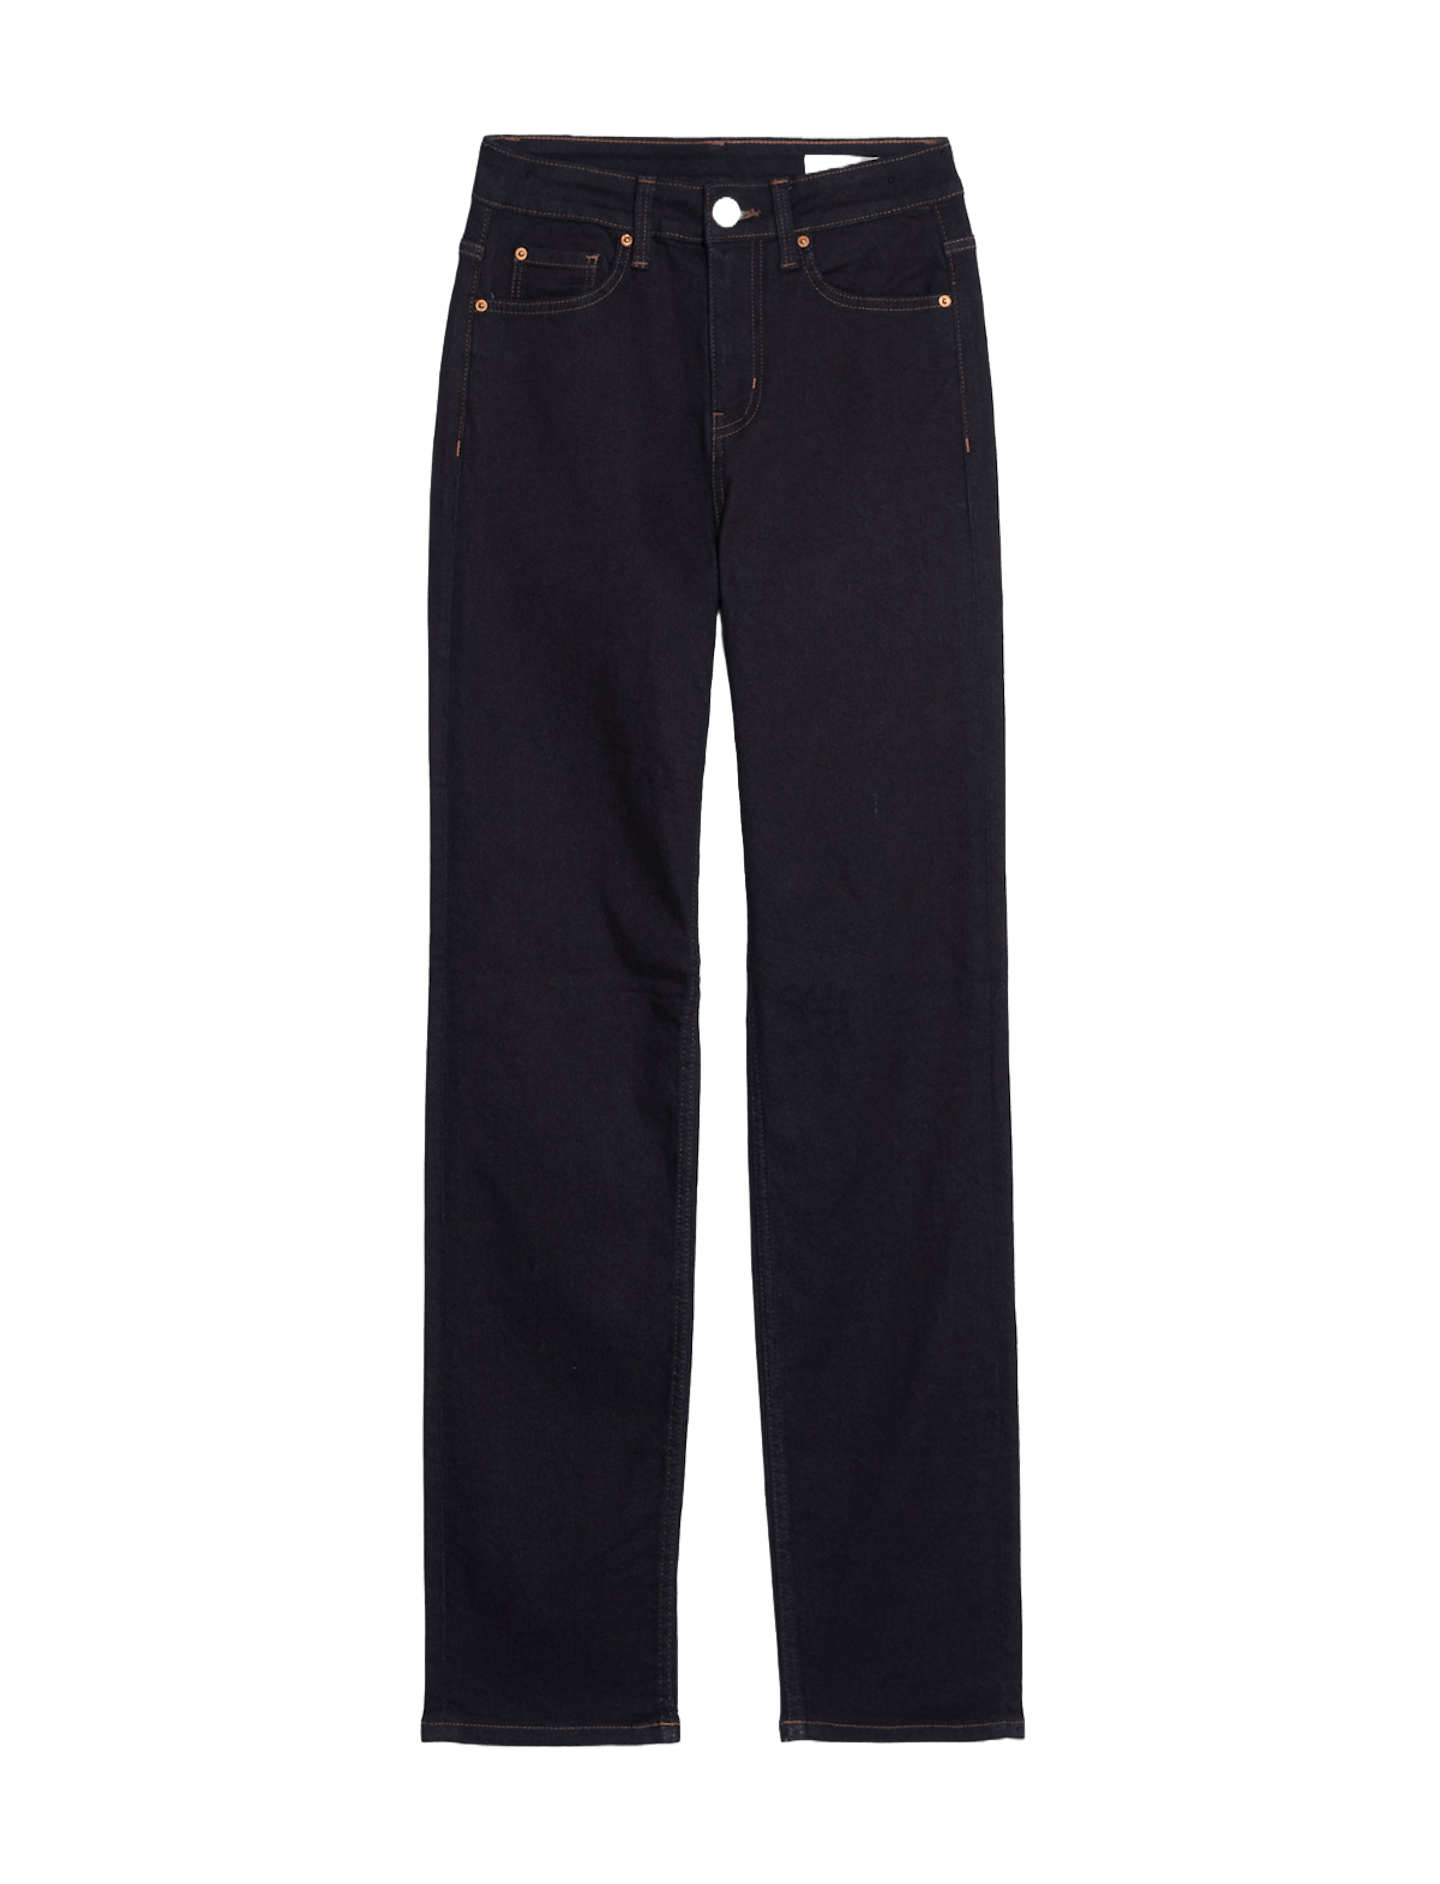 M&S Jeans